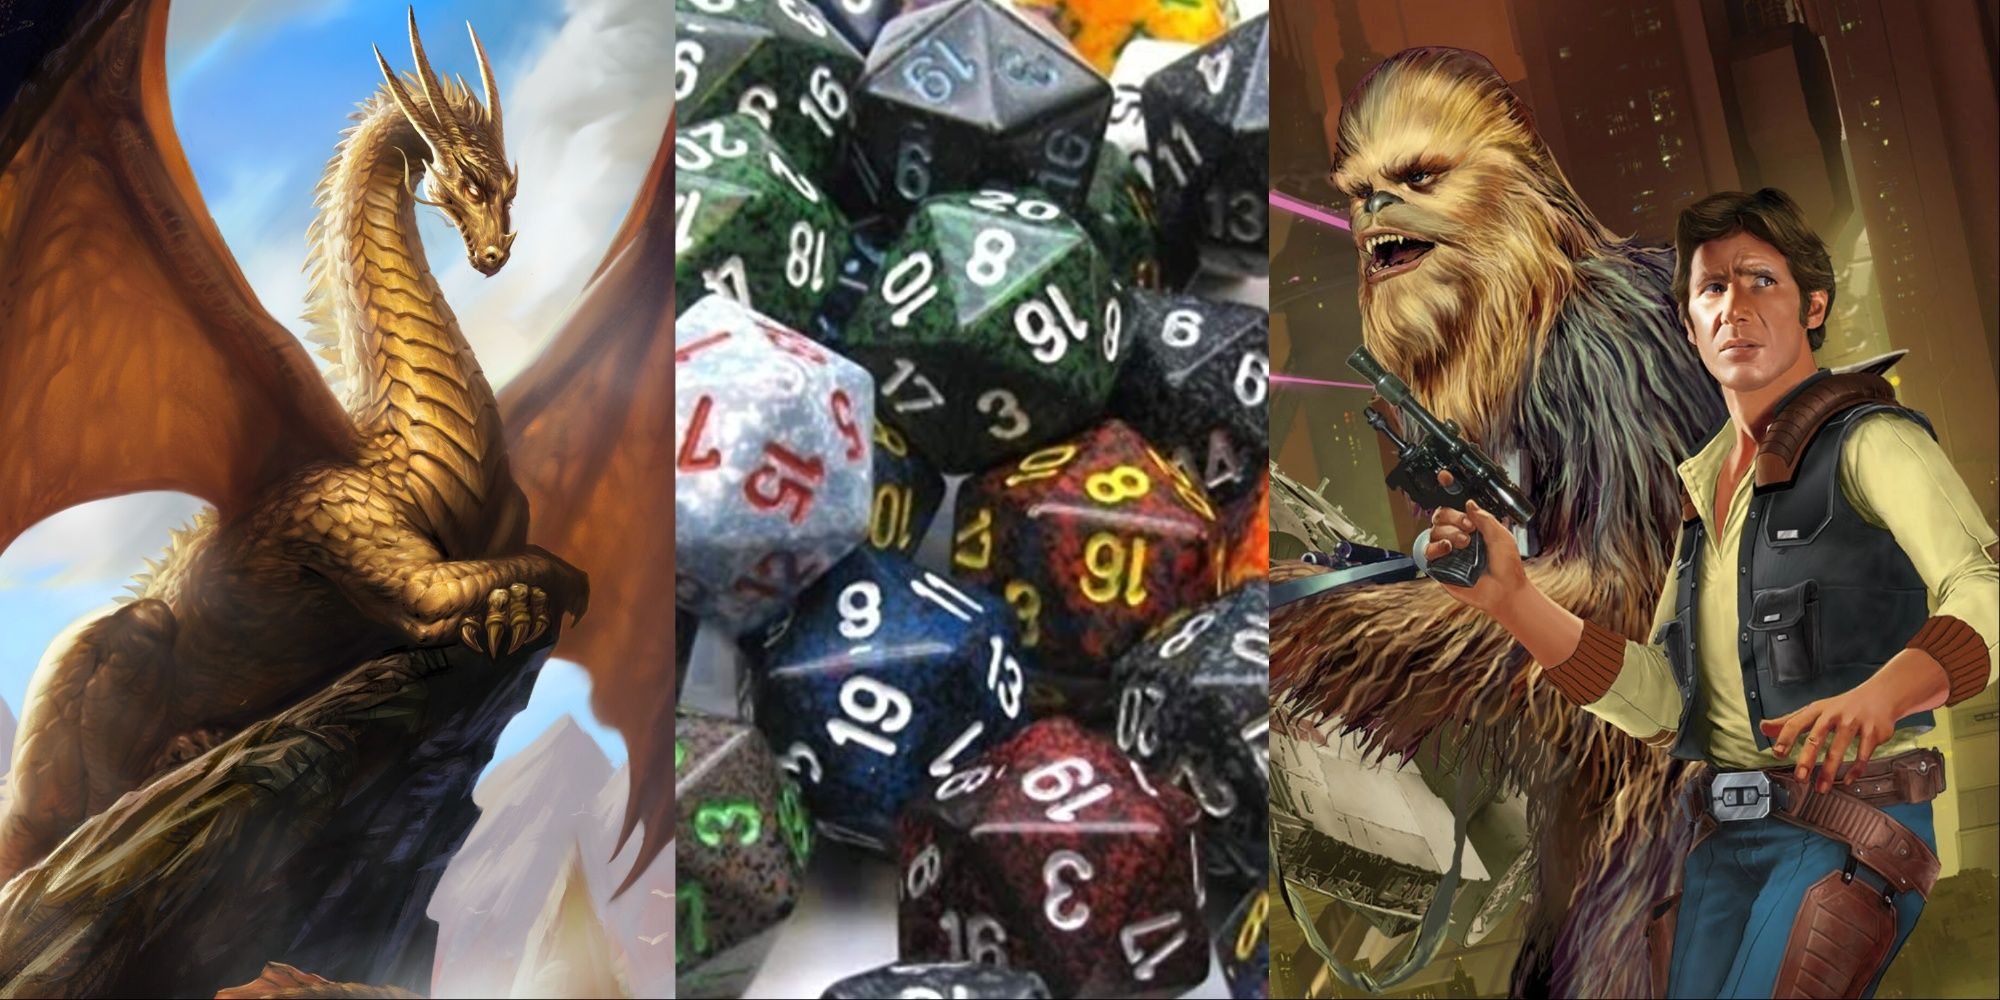 ttrpg title image godlen dragon pathfinder D&D dice han solo and chewy star wars -1